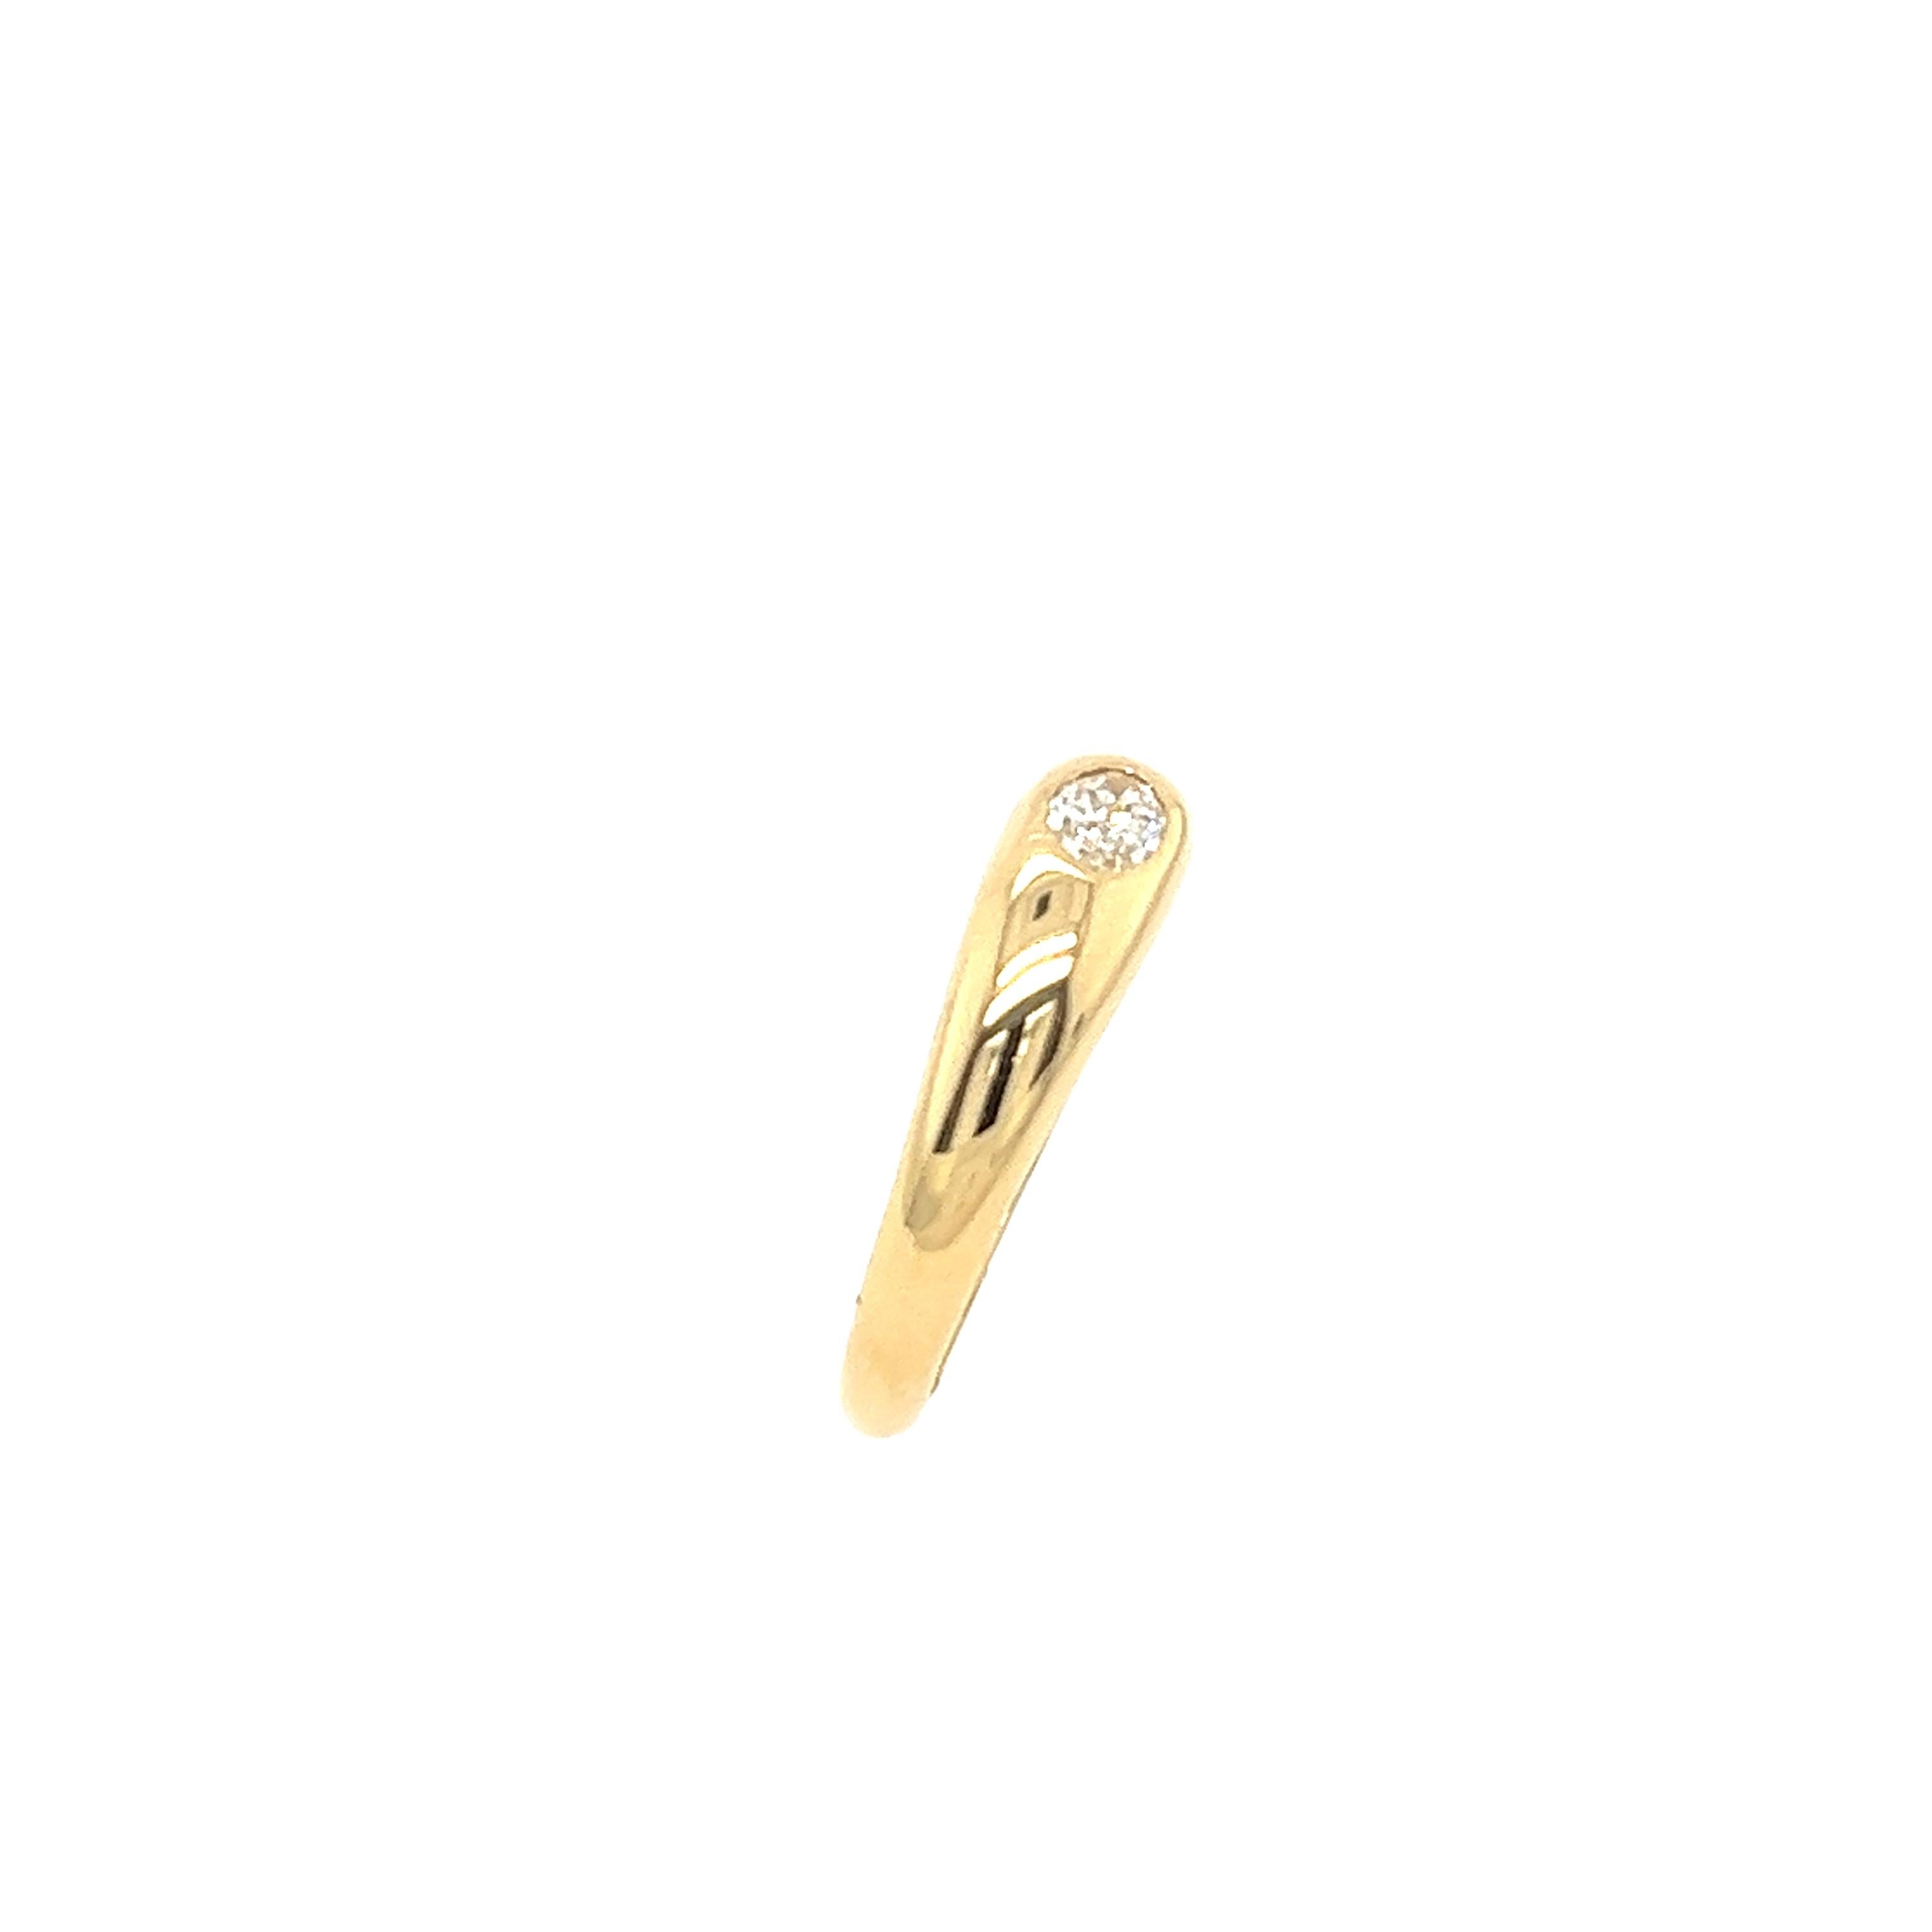 Oval Cut 18ct Yellow Gold Diamond Ring, Set With 0.30ct Natural Oval Diamond G-H/VS For Sale